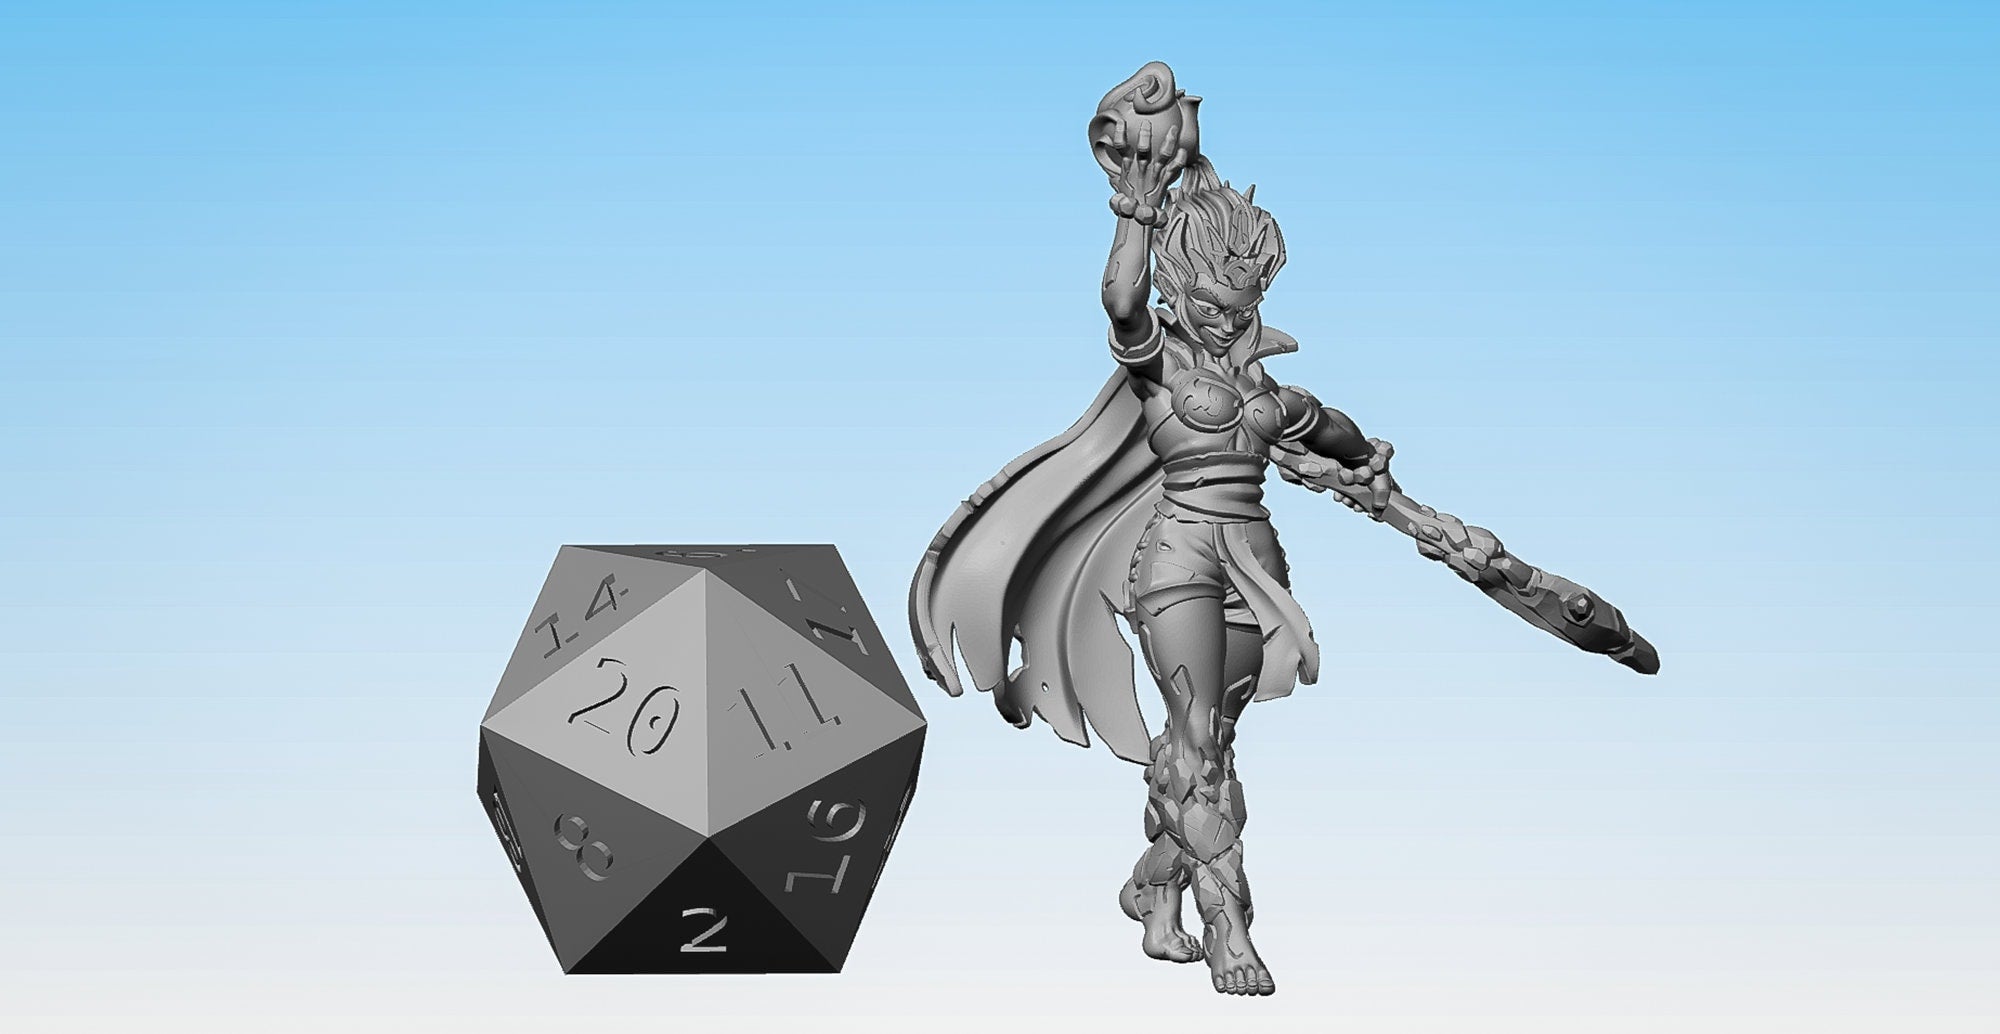 MAGMA SORCERESS "Preparing"-Role Playing Miniatures